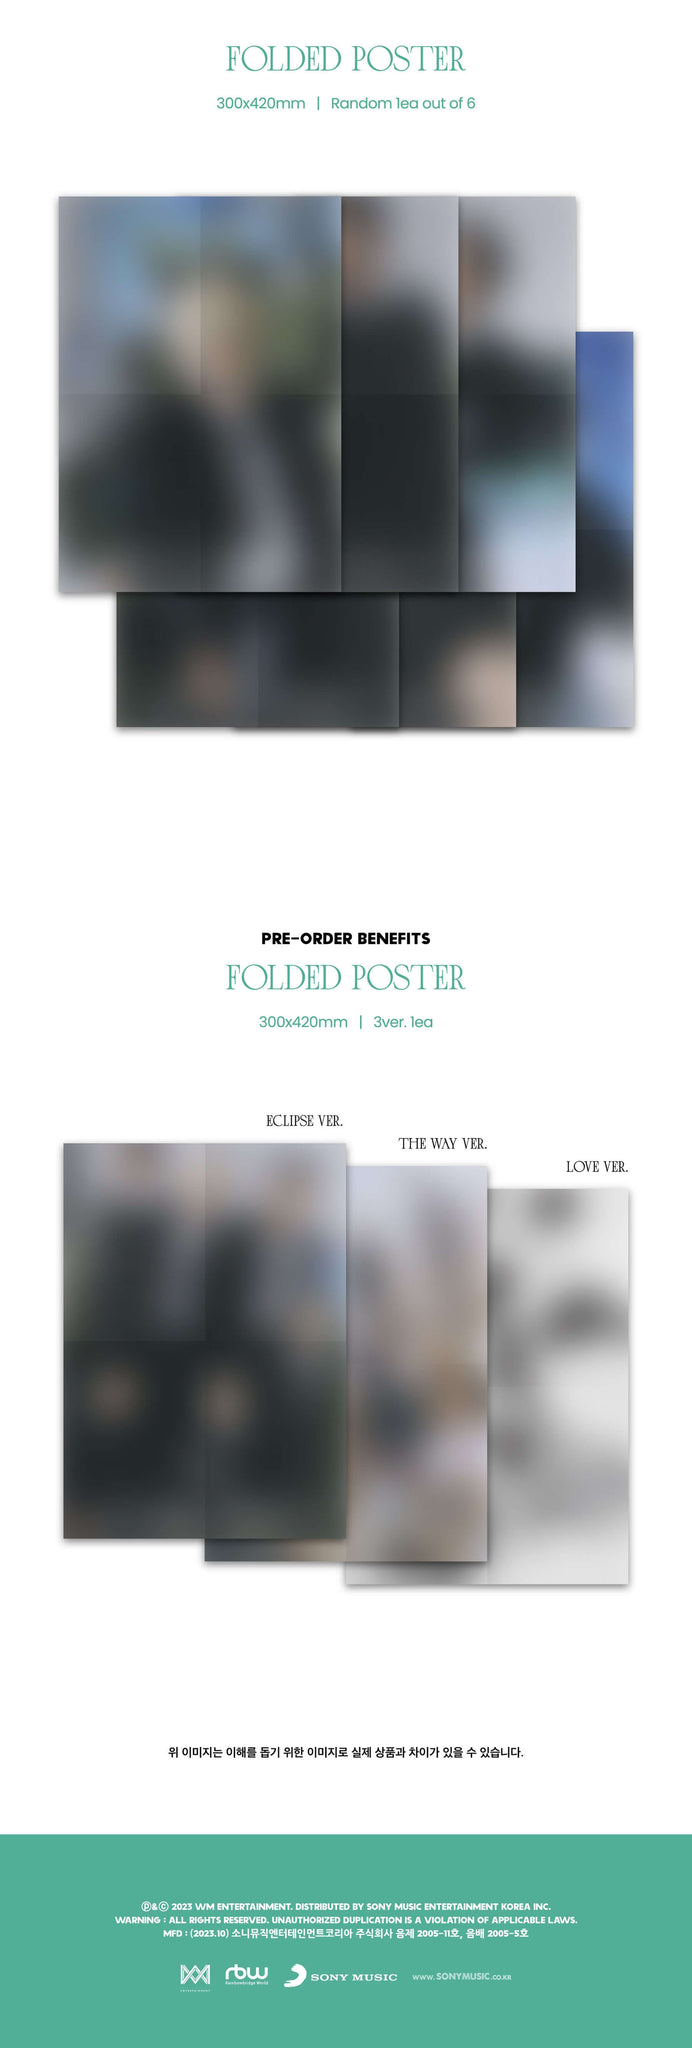 ONF 7th Mini Album LOVE EFFECT Inclusions Folded Poster Pre-order Only Folded Poster